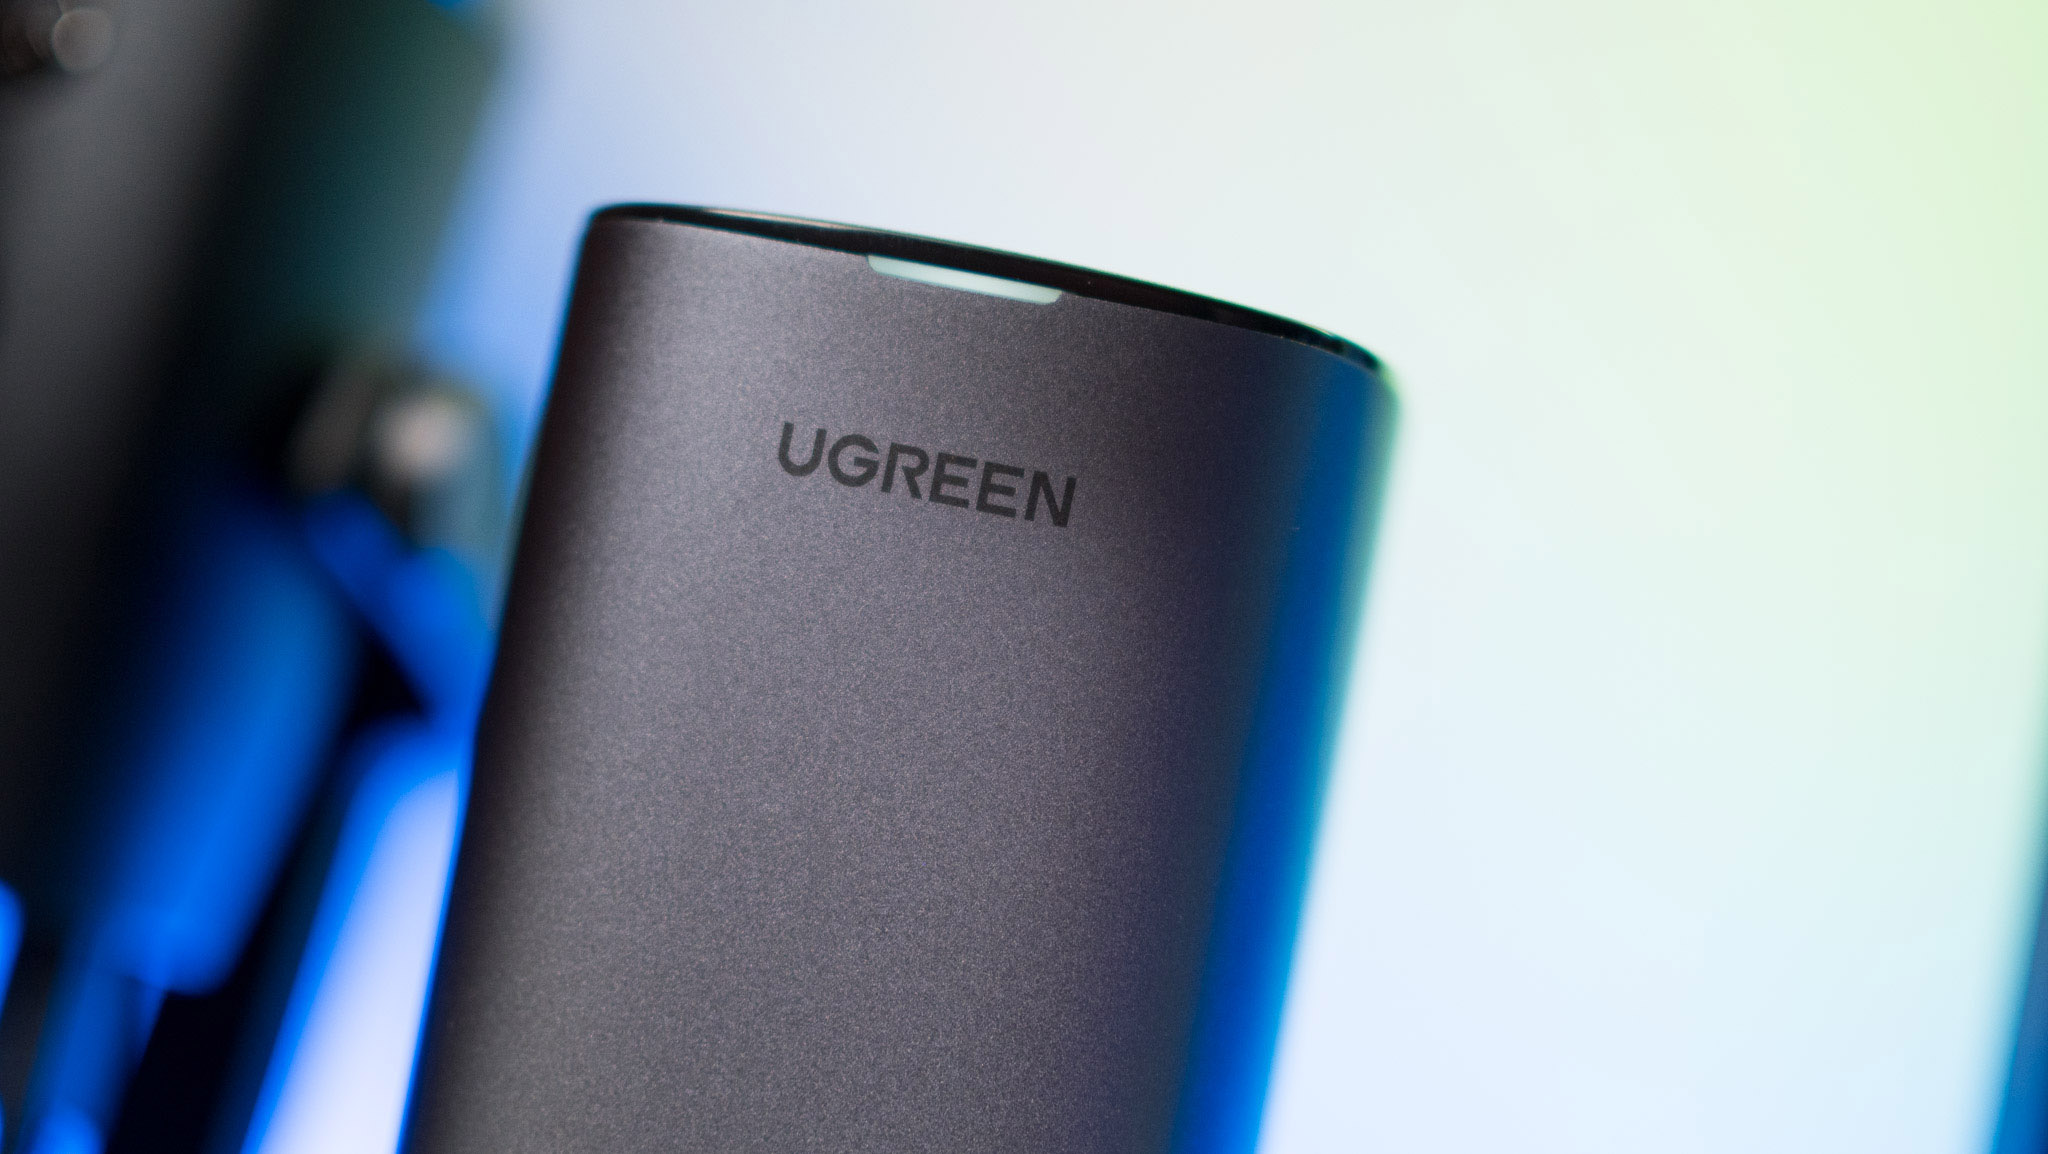 UGREEN 13-in-1 docking station power LED with UGREEN logo